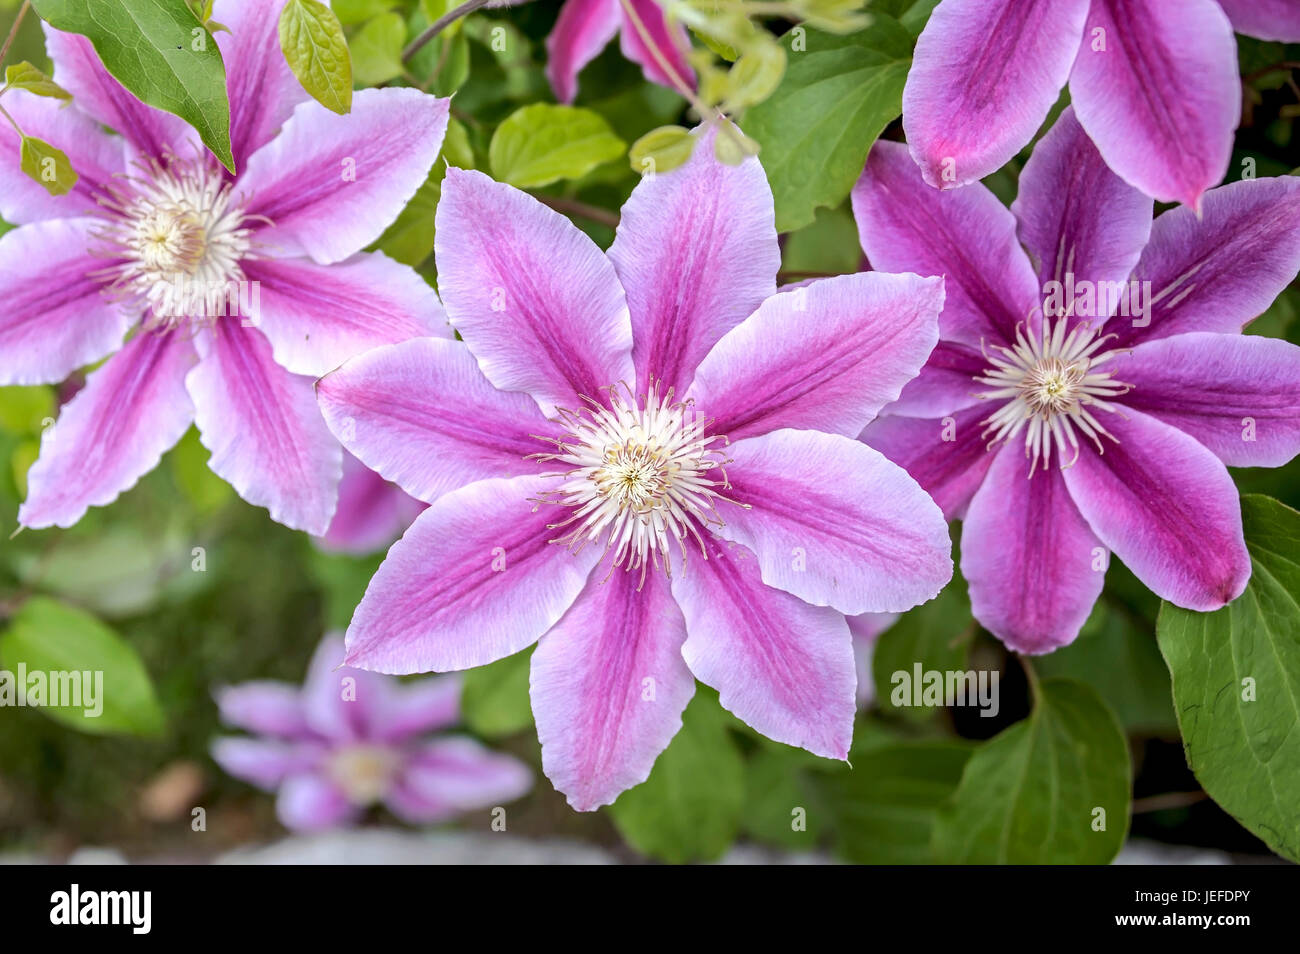 Forest shoot, Clematis Dr. Ruppel , Waldrebe (Clematis 'Dr Ruppel') Stock Photo